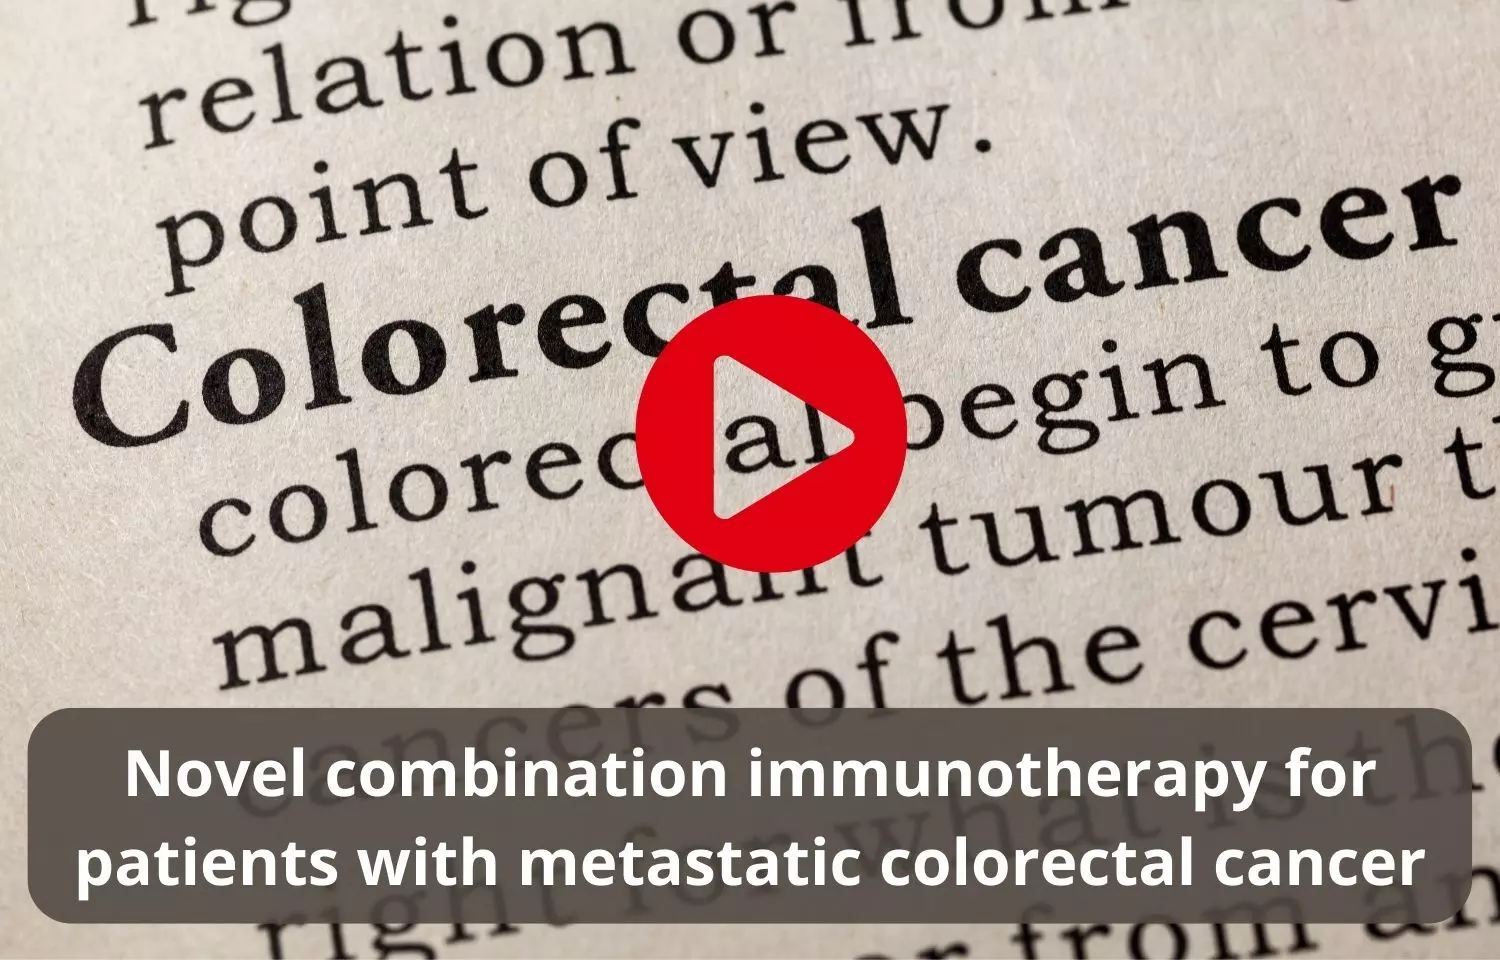 Novel combination immunotherapy for patients with metastatic colorectal cancer